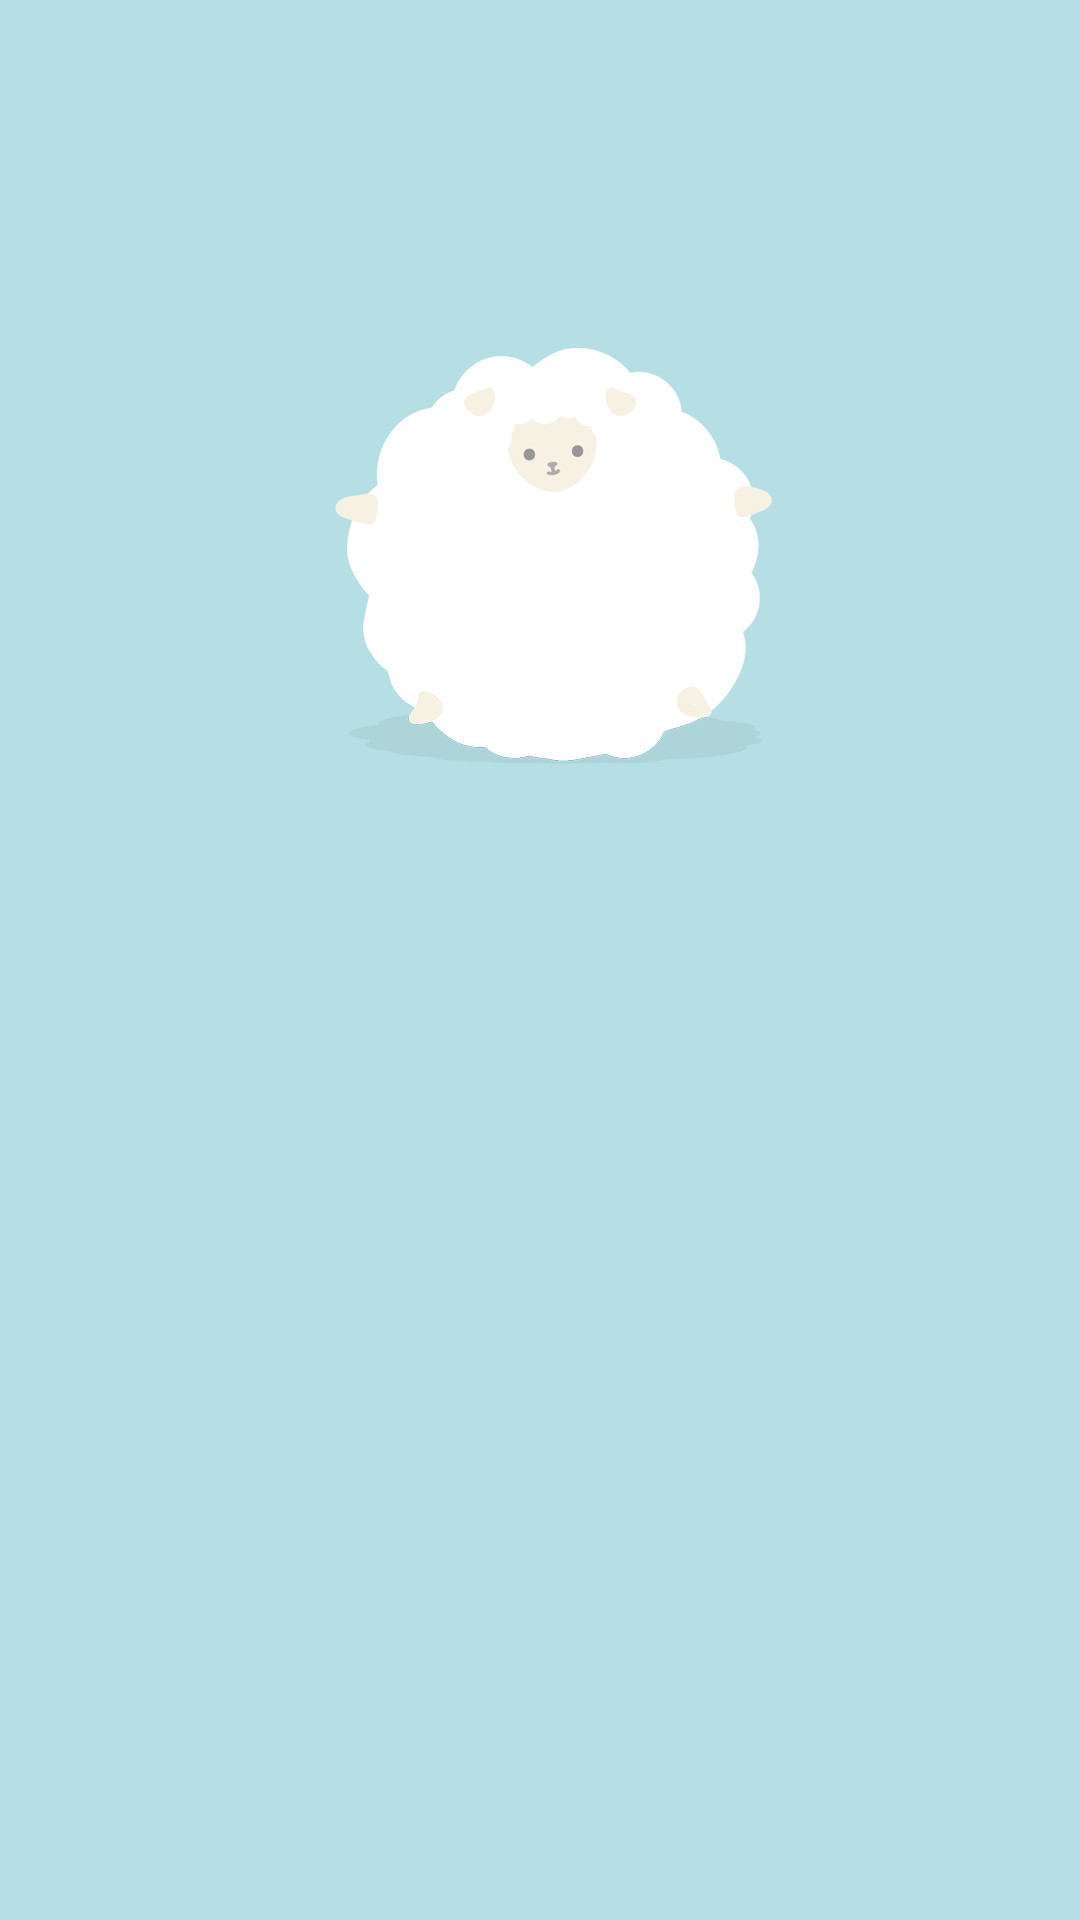 1080x1920 Cute Gifs Backgrounds for Your Phone